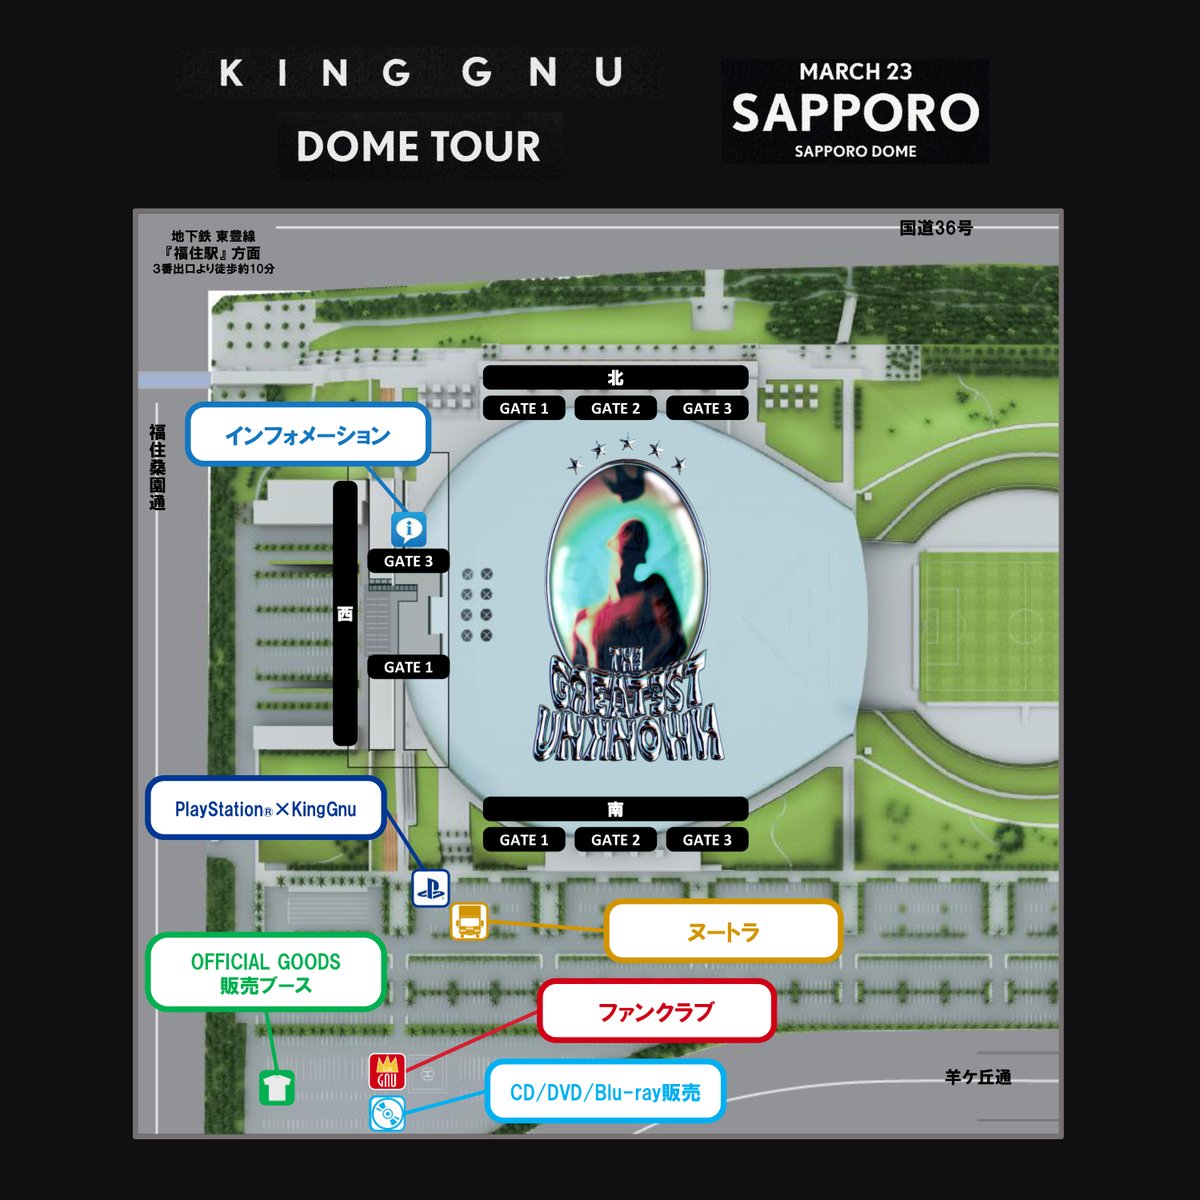 King Gnu Dome Tour ⭐️⭐️⭐️⭐️⭐️ 「THE GREATEST UNKNOWN」 3/23(土) 札幌ドーム公演 会場MAP公開⚡